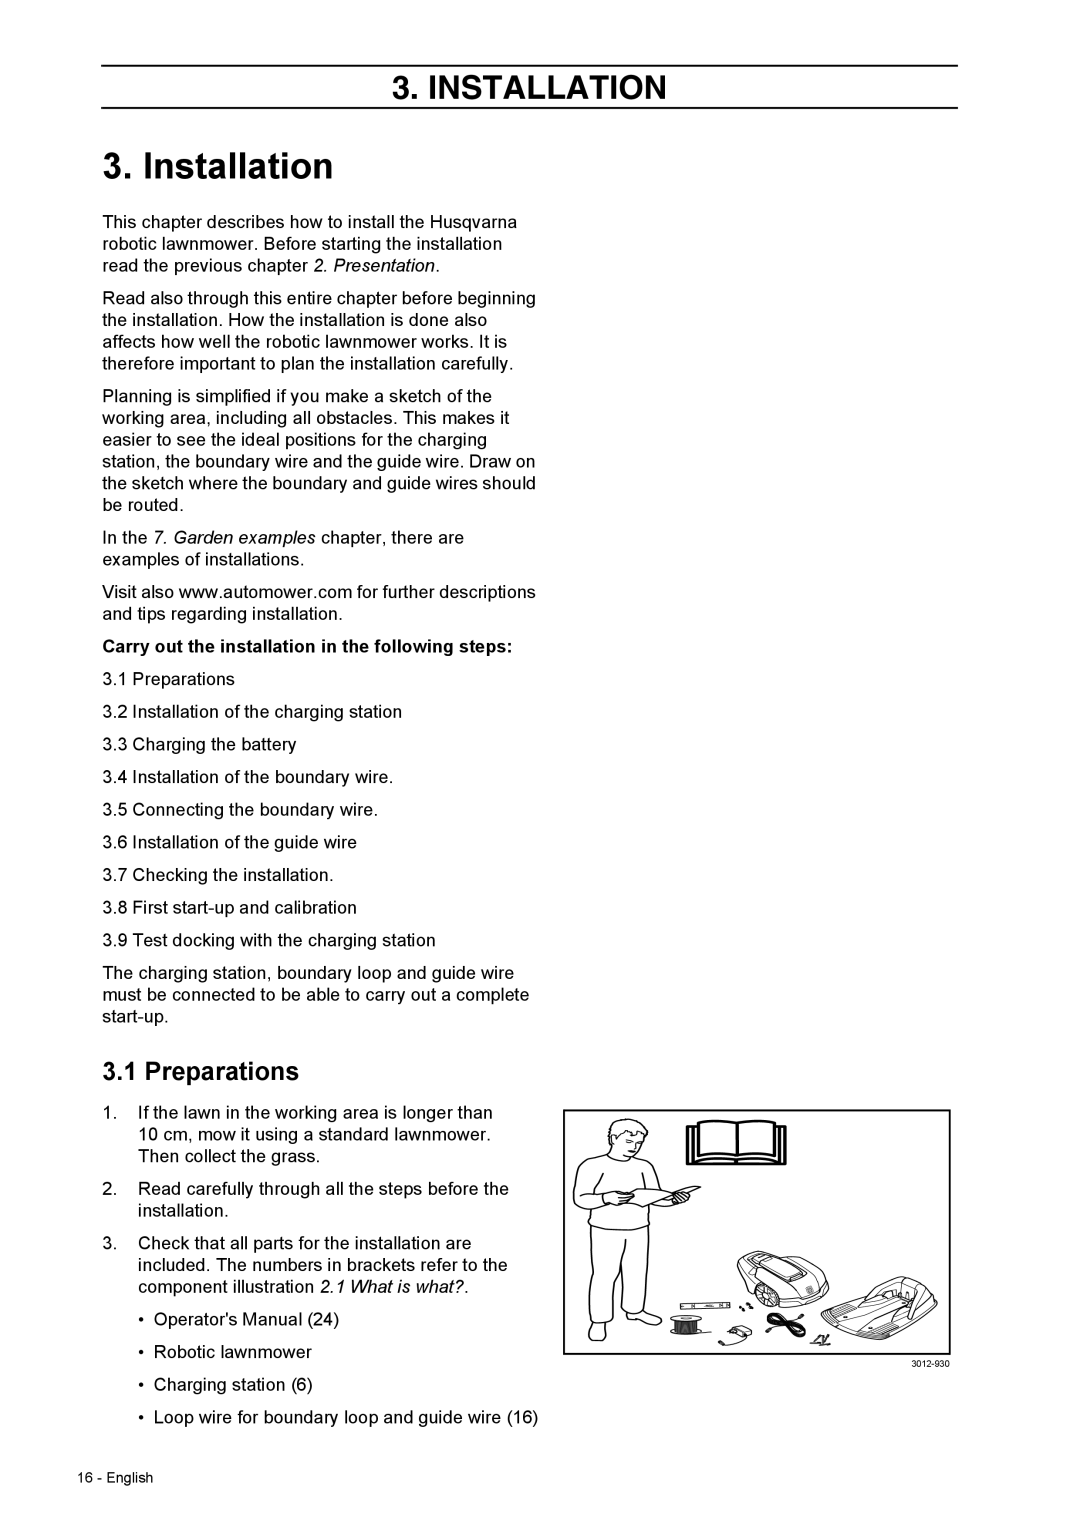 Husqvarna 308 manual Installation, Preparations, Carry out the installation in the following steps 